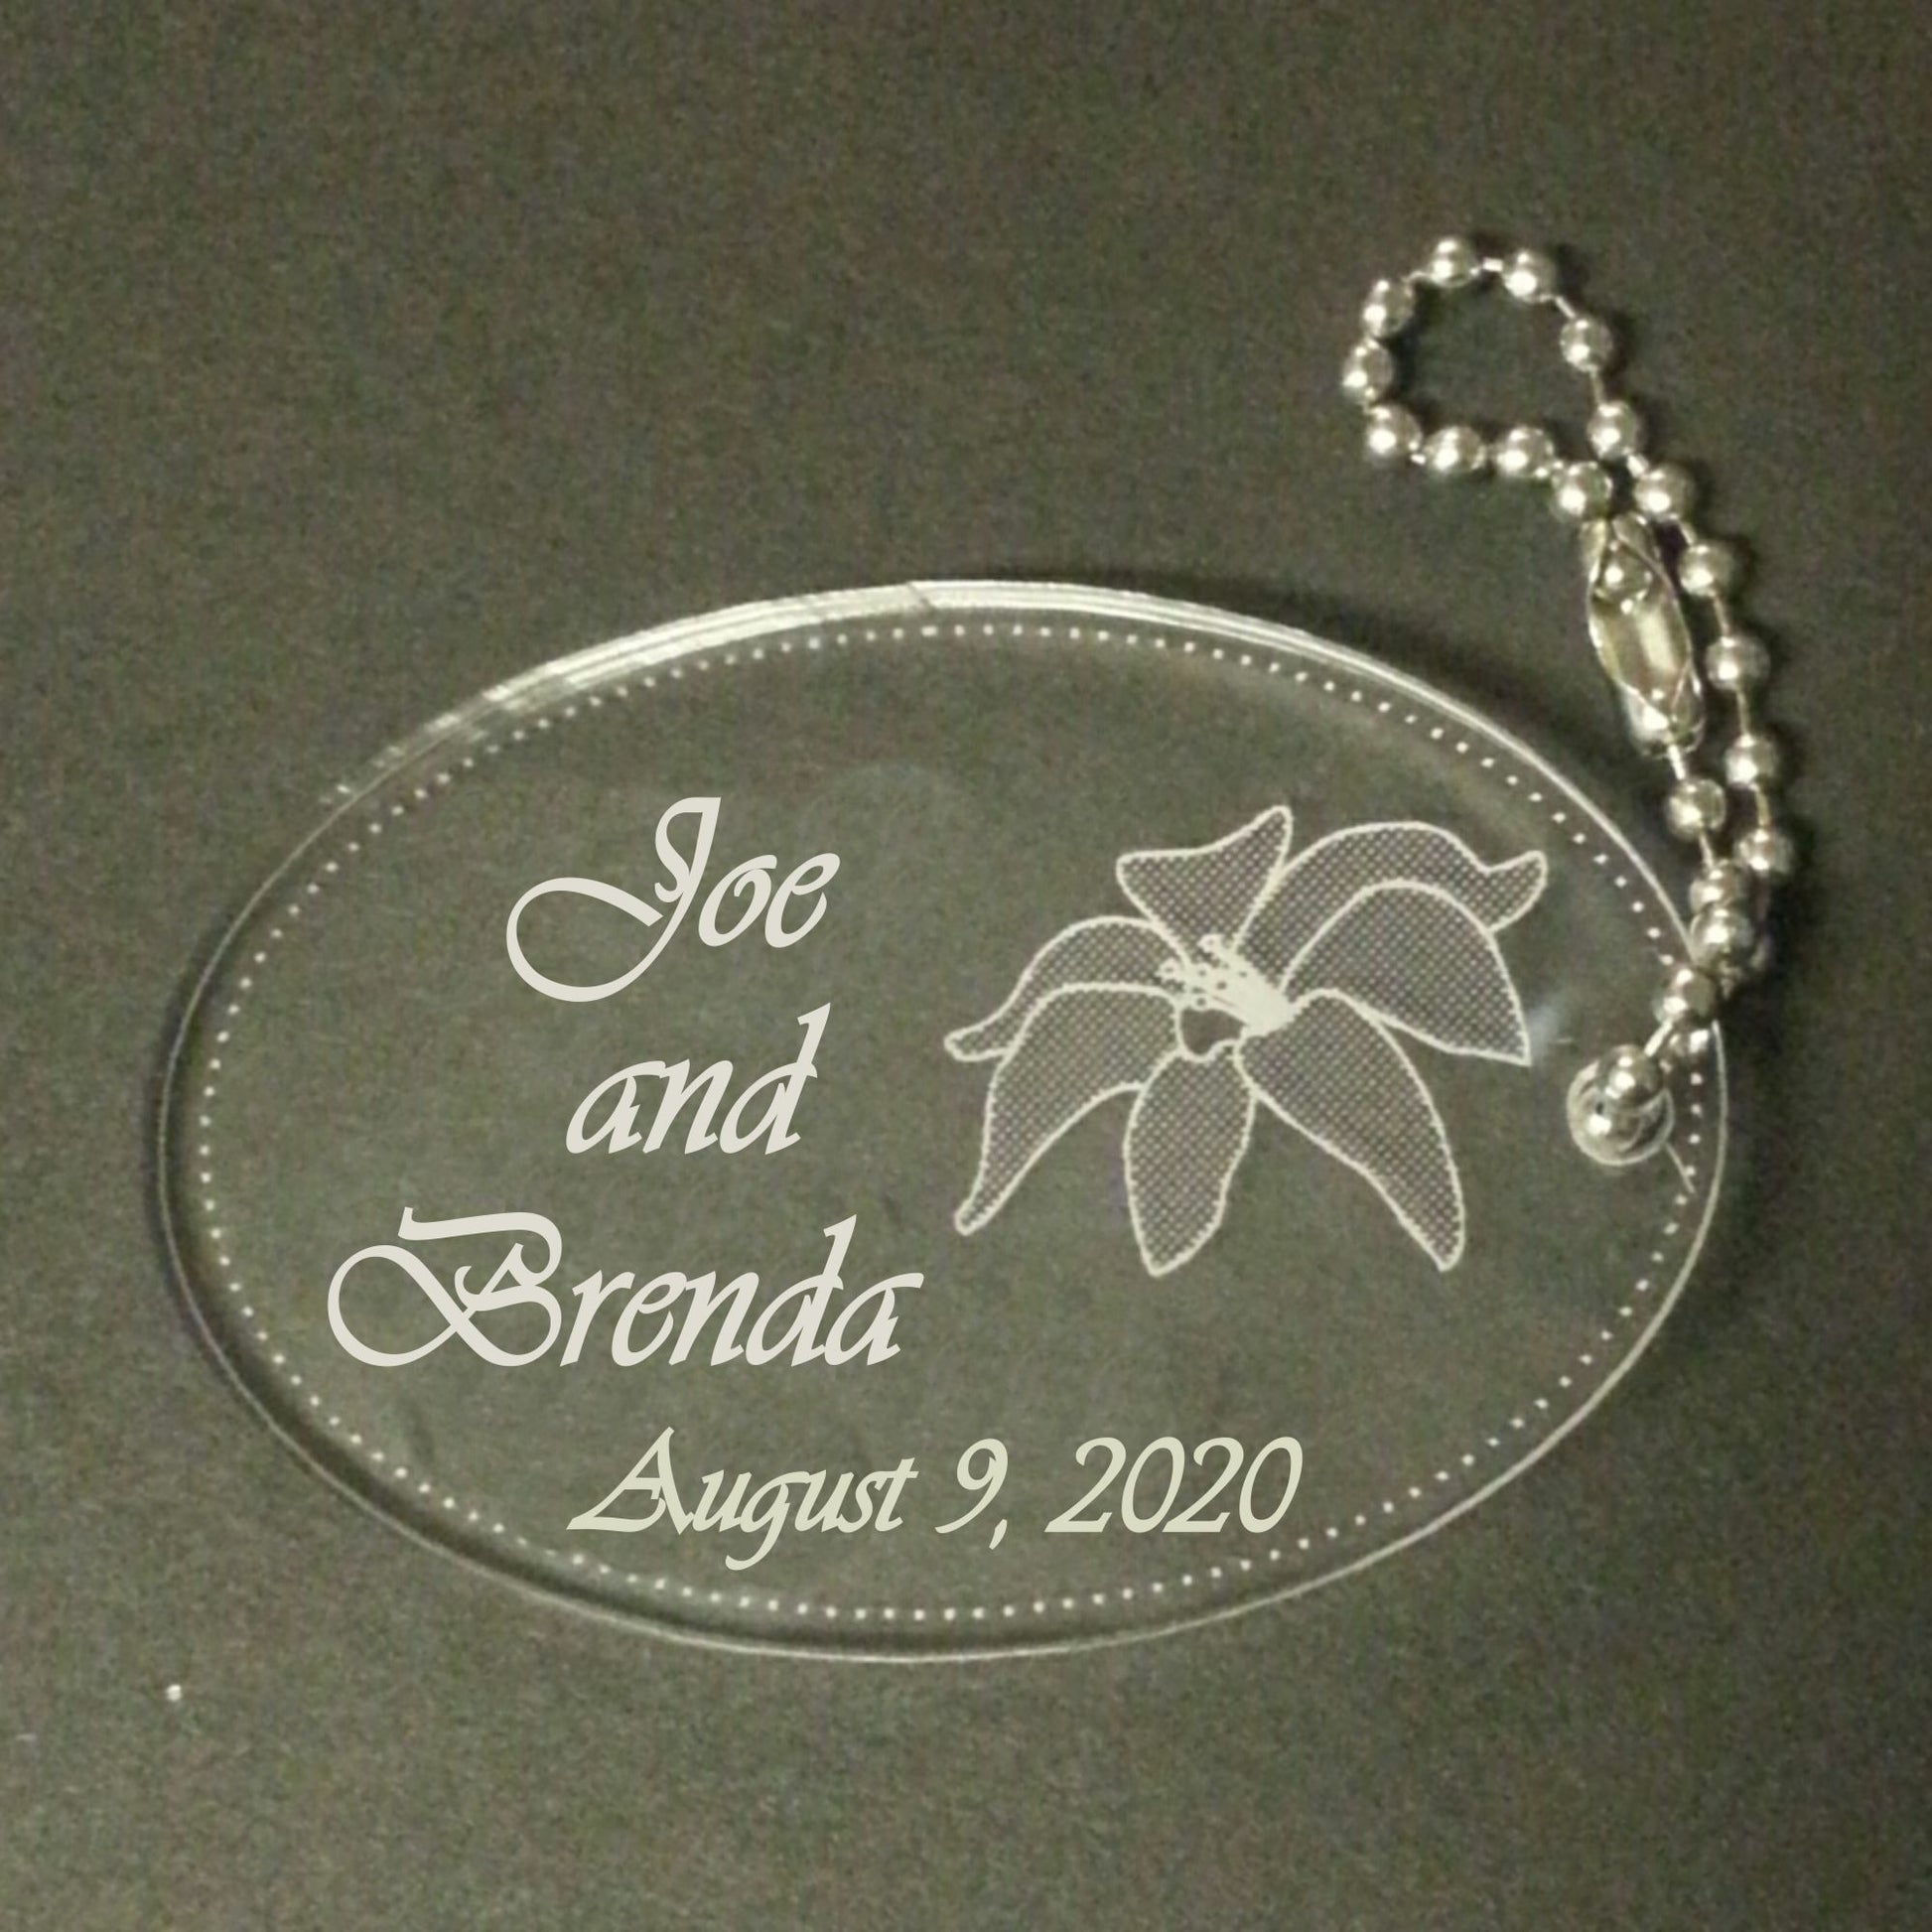 acrylic oval keychain favor engraved with a lily design and attached to a small chain